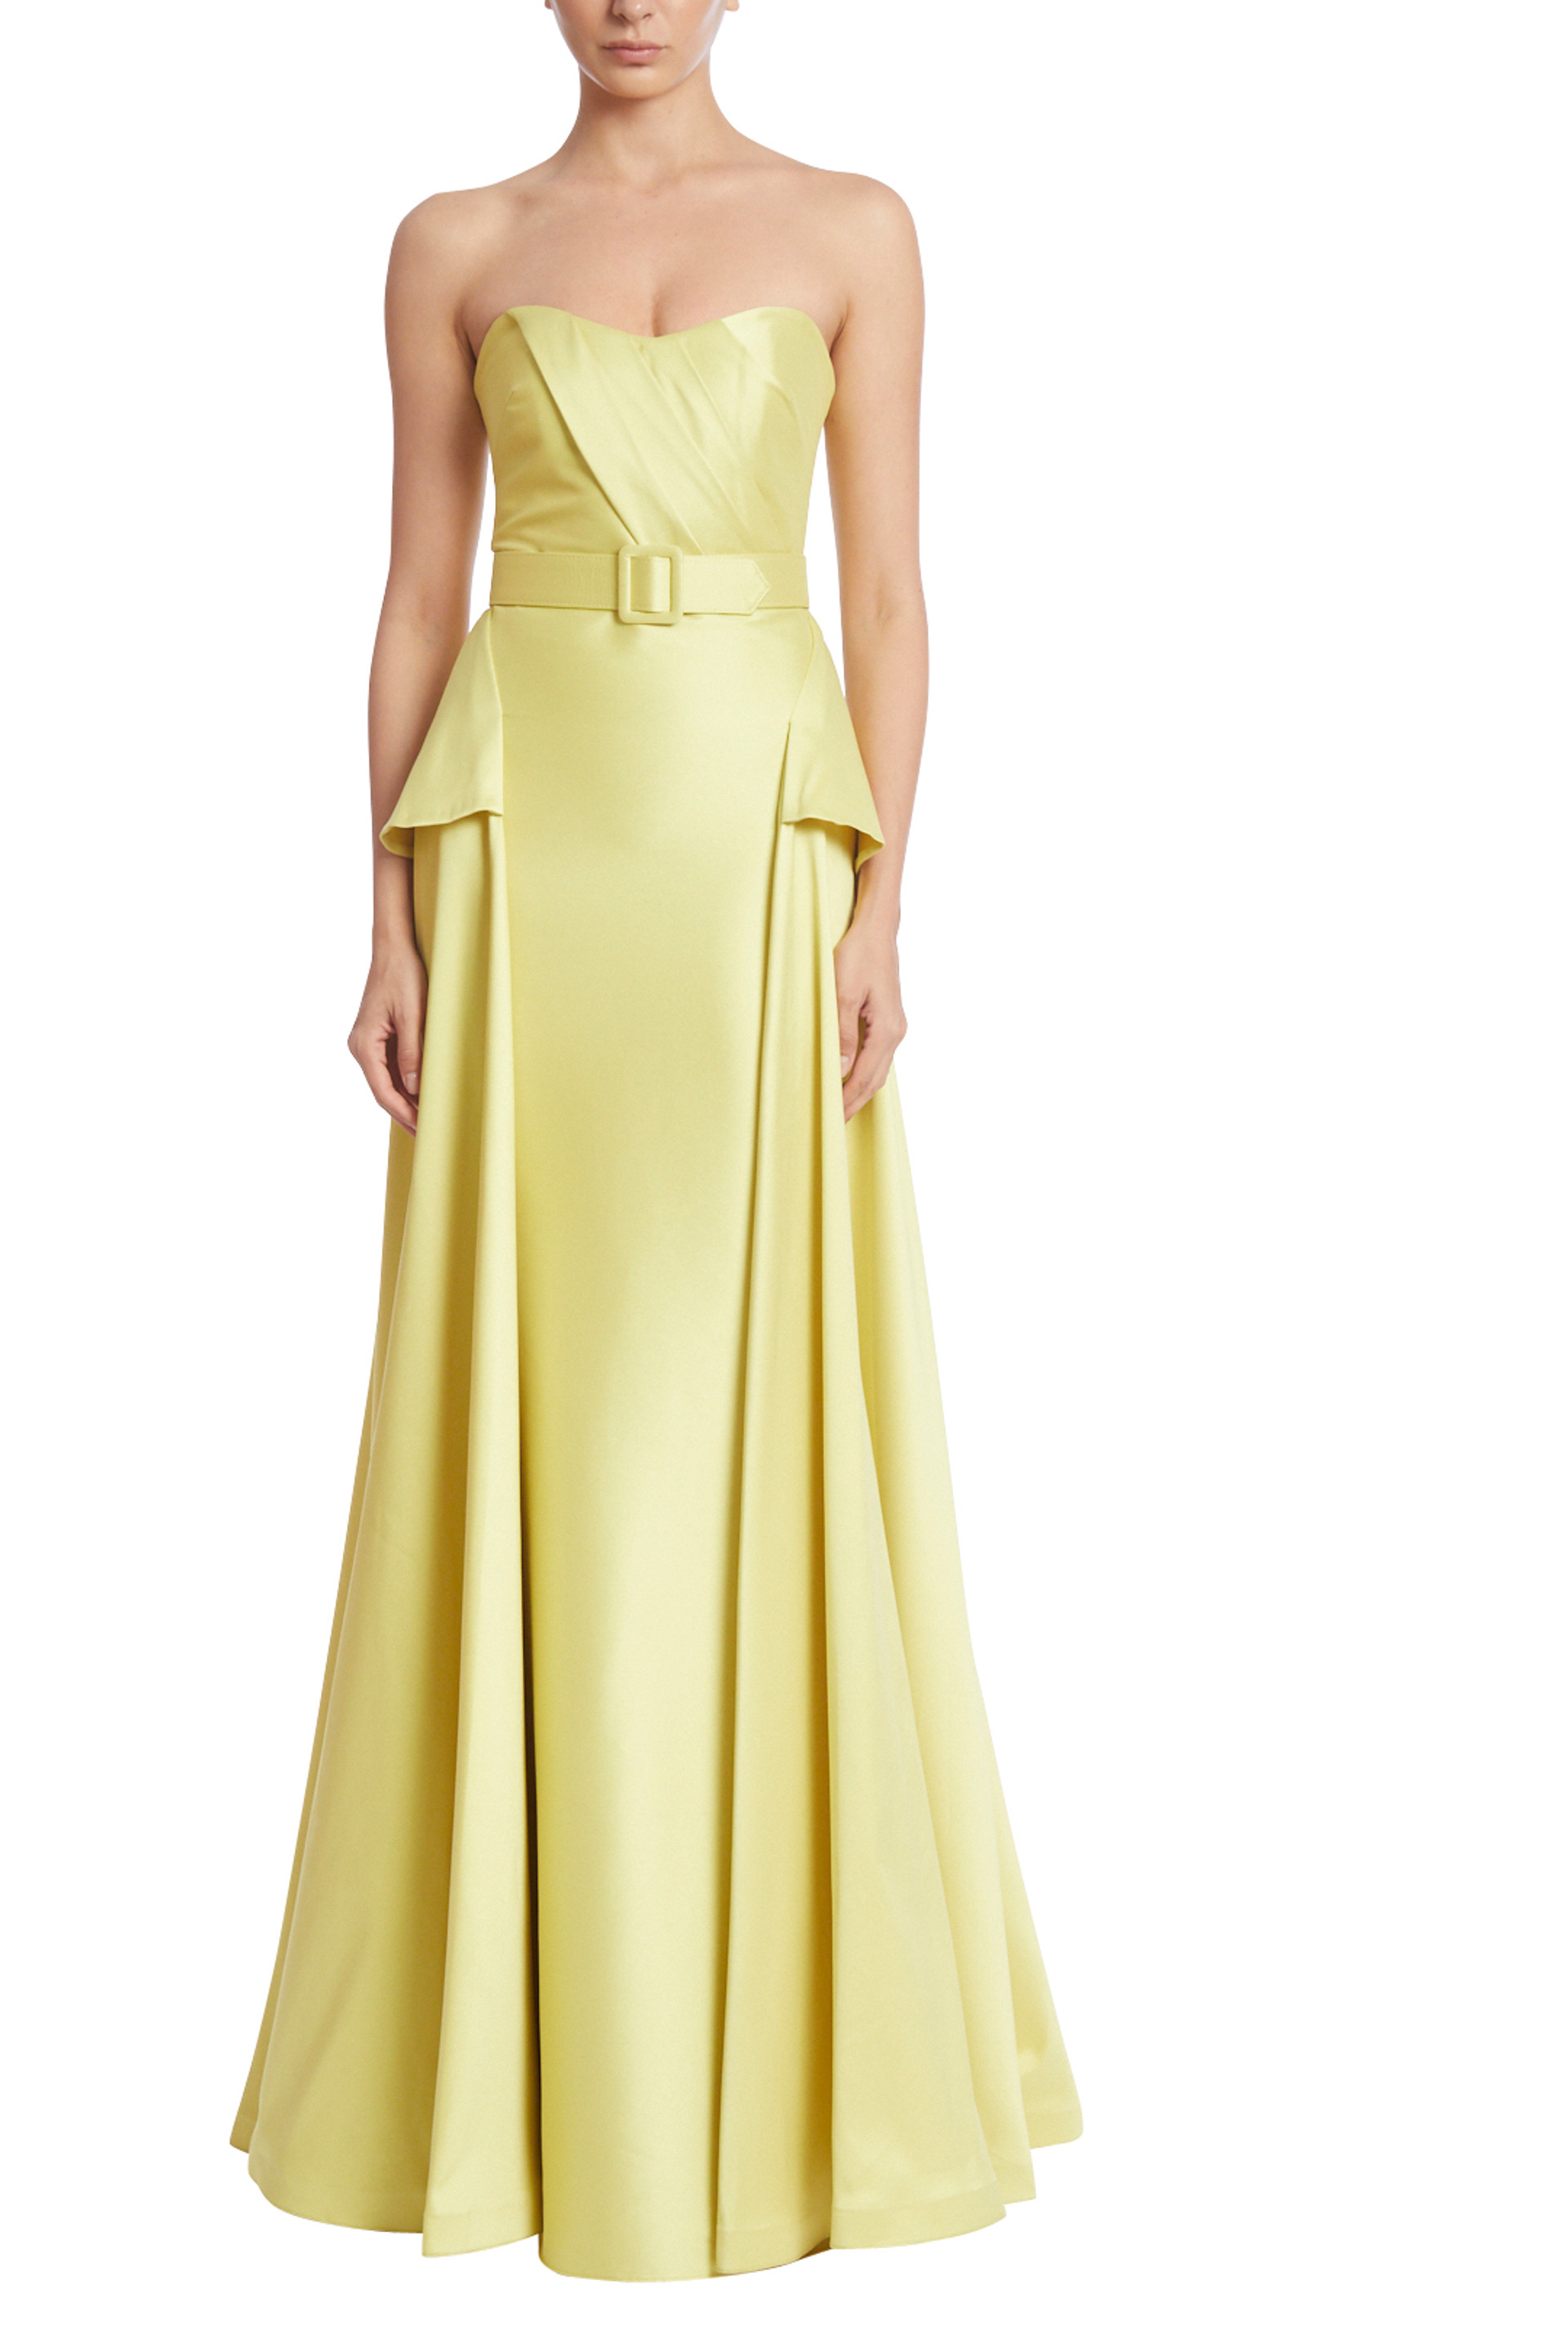 Strapless Fitted Evening Gown with Peplum by Badgley Mischka